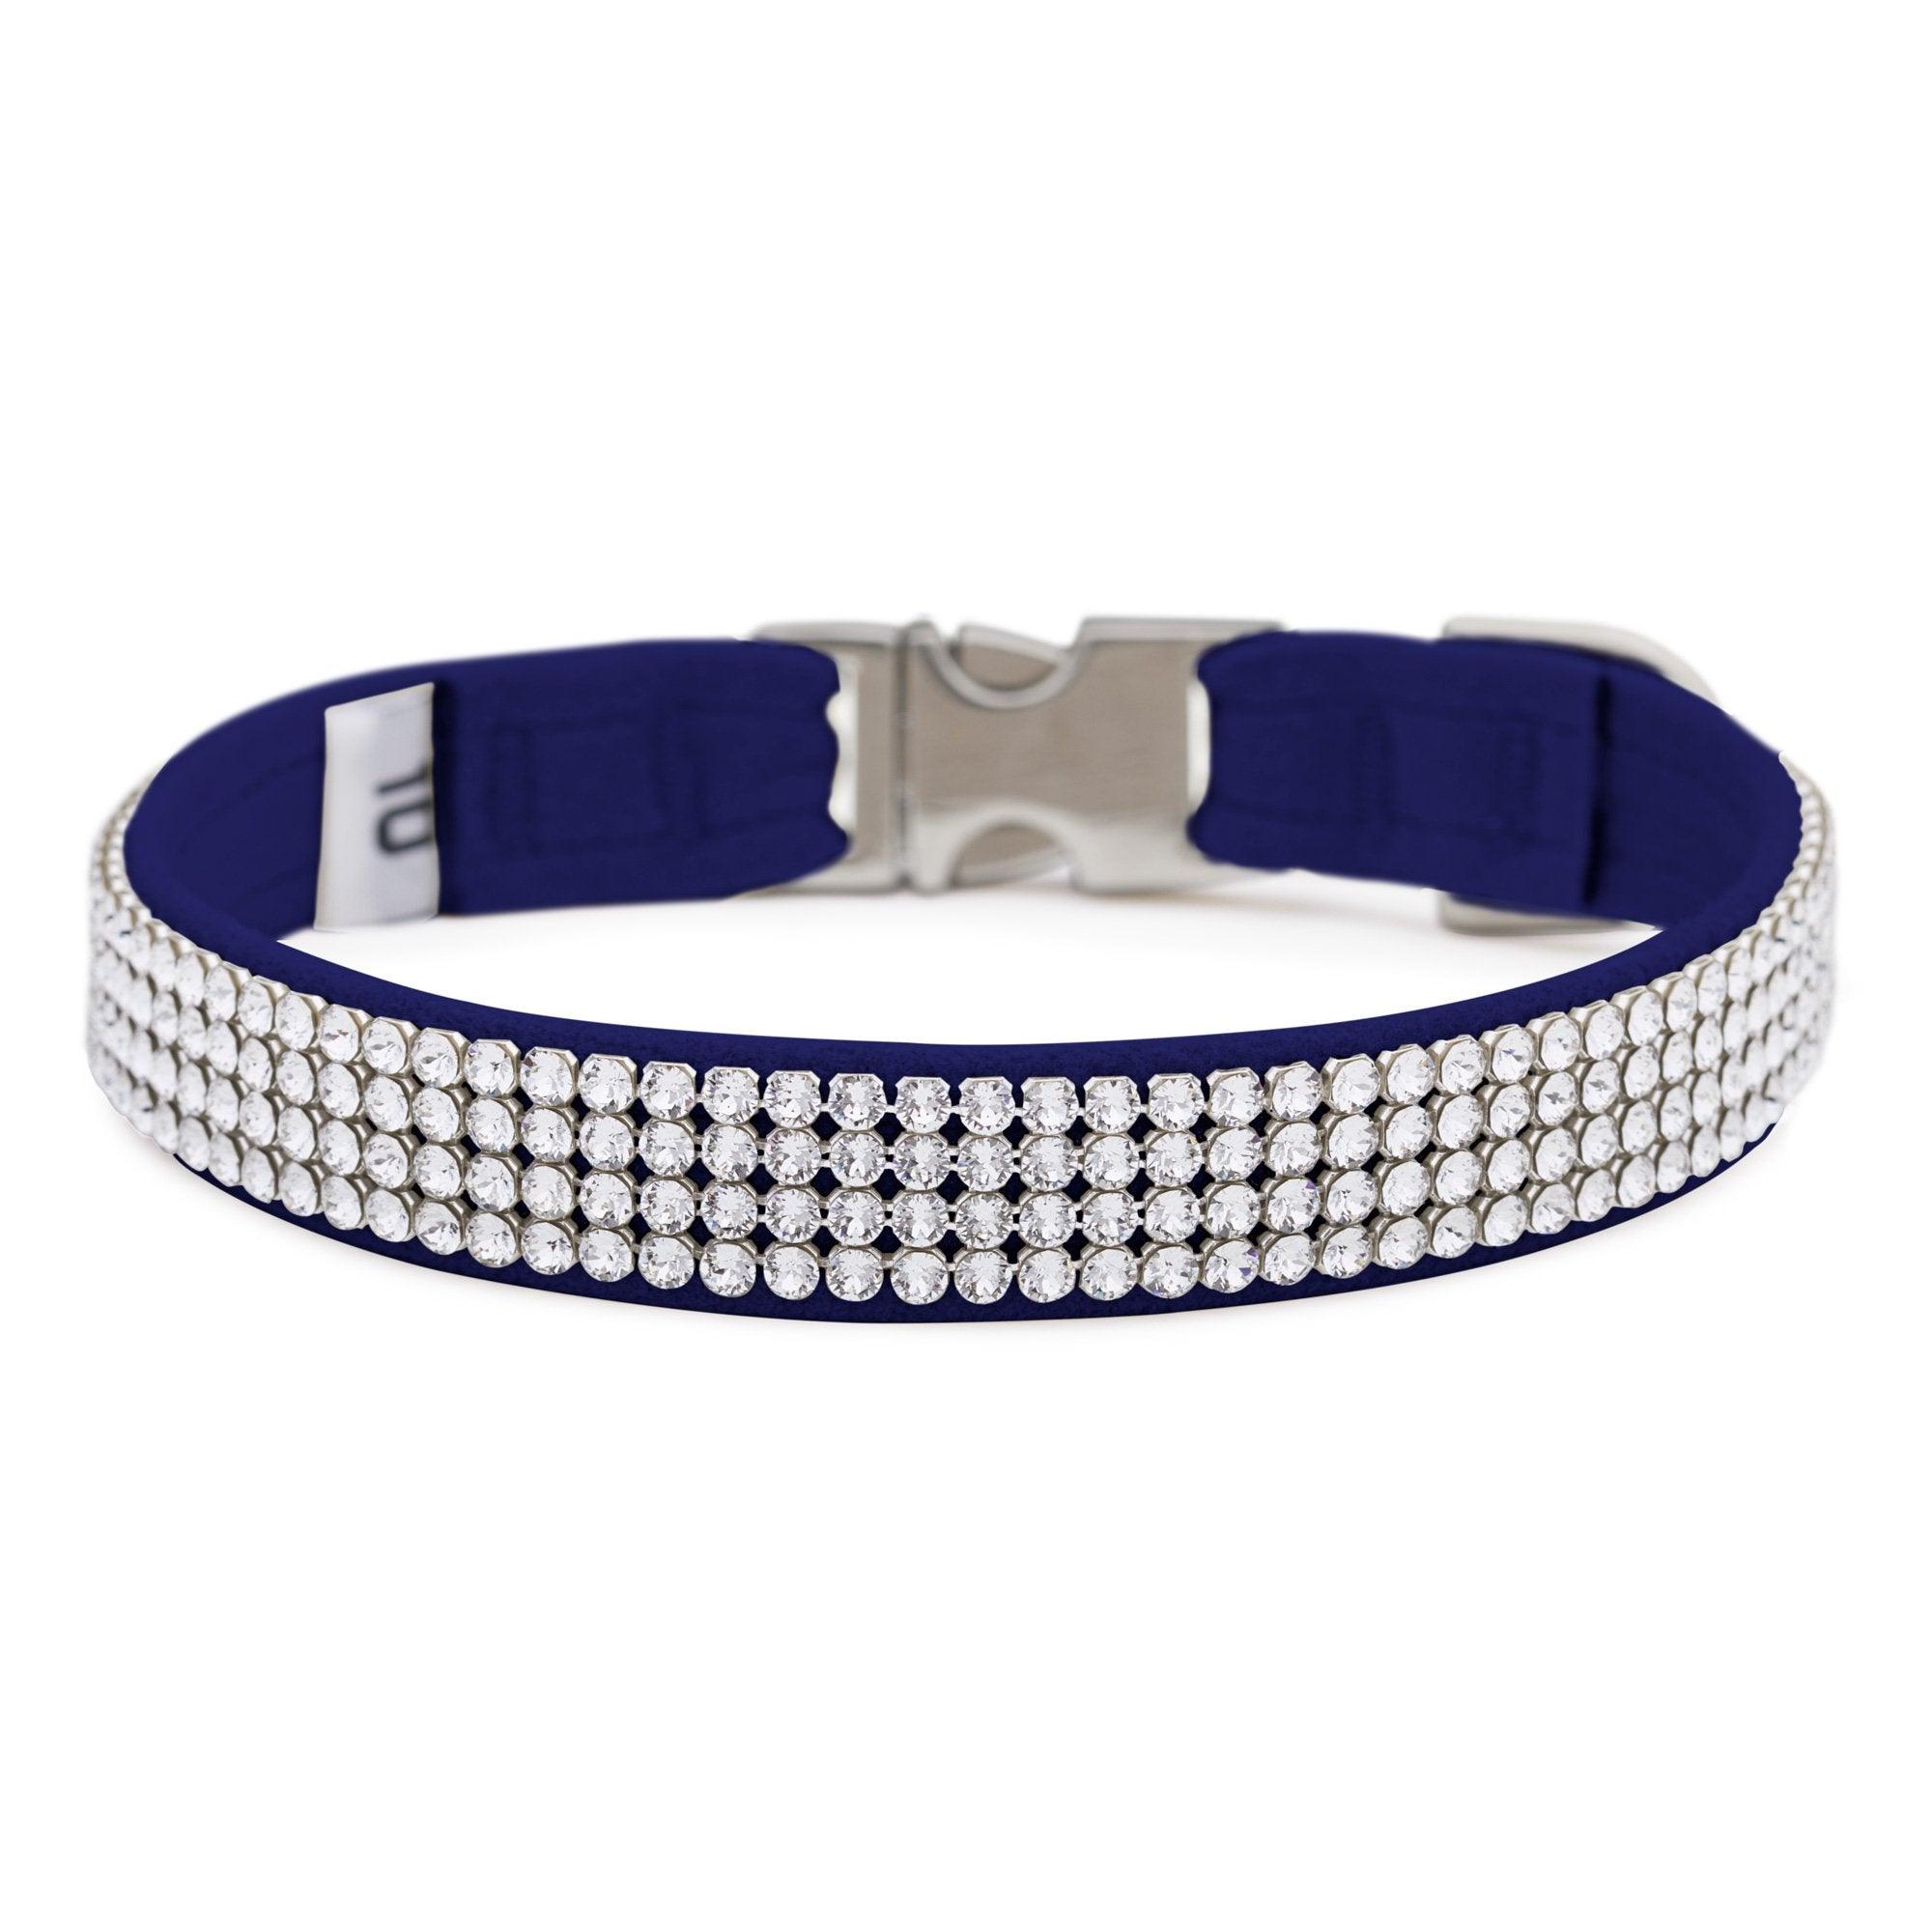 Indigo 4 Row Giltmore Perfect Fit Collar - Rocky & Maggie's Pet Boutique and Salon